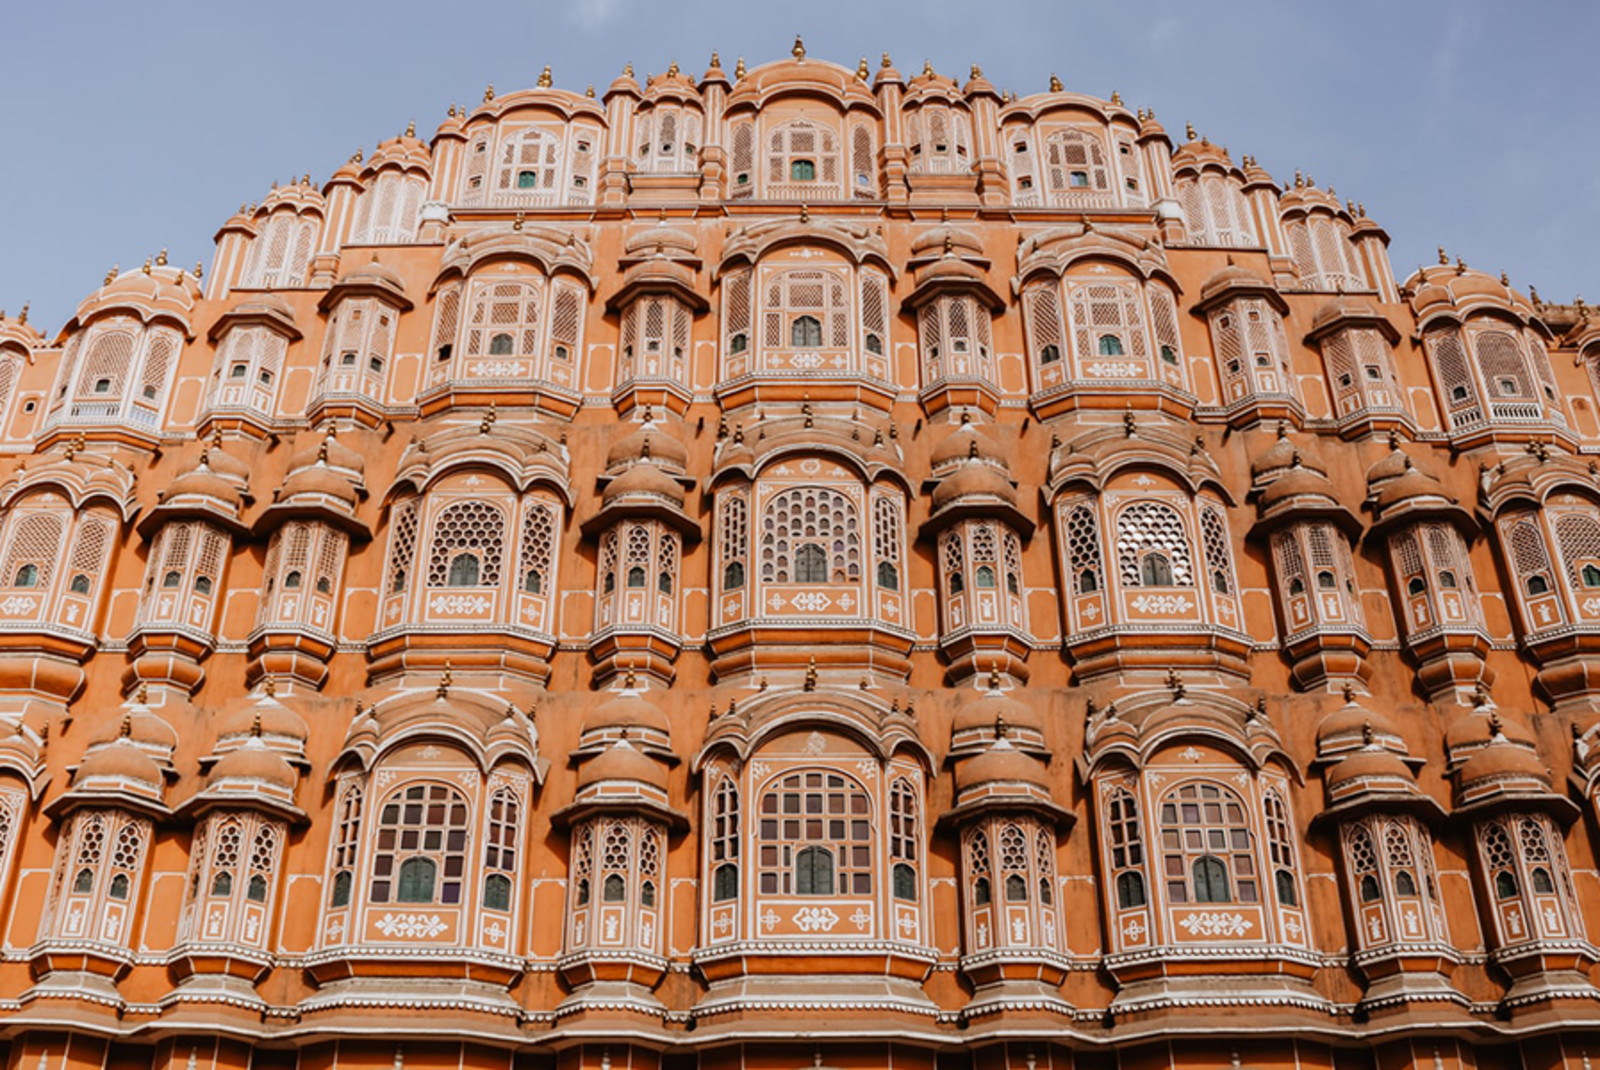 An Architectural Journey in Rajasthan, India - Day 2: Explore Jaipur